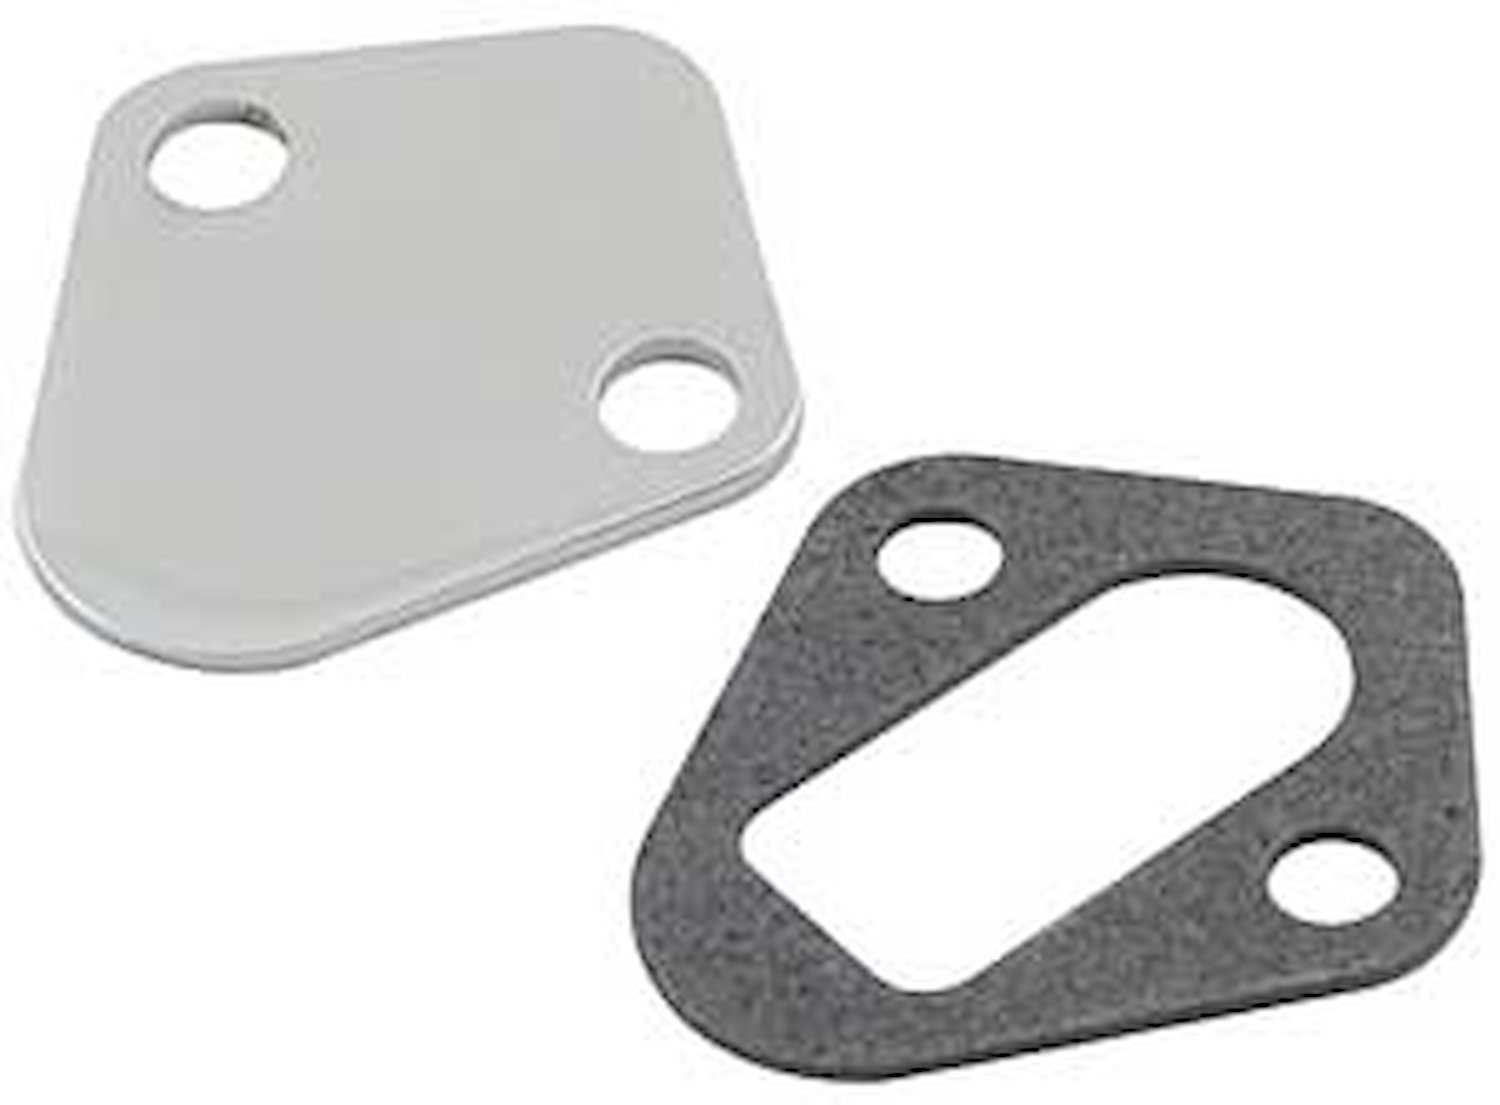 Fuel Pump Block-Off Plate BB-Chevy & Most V6/V8 with 1-3/4" Bolt Spacing